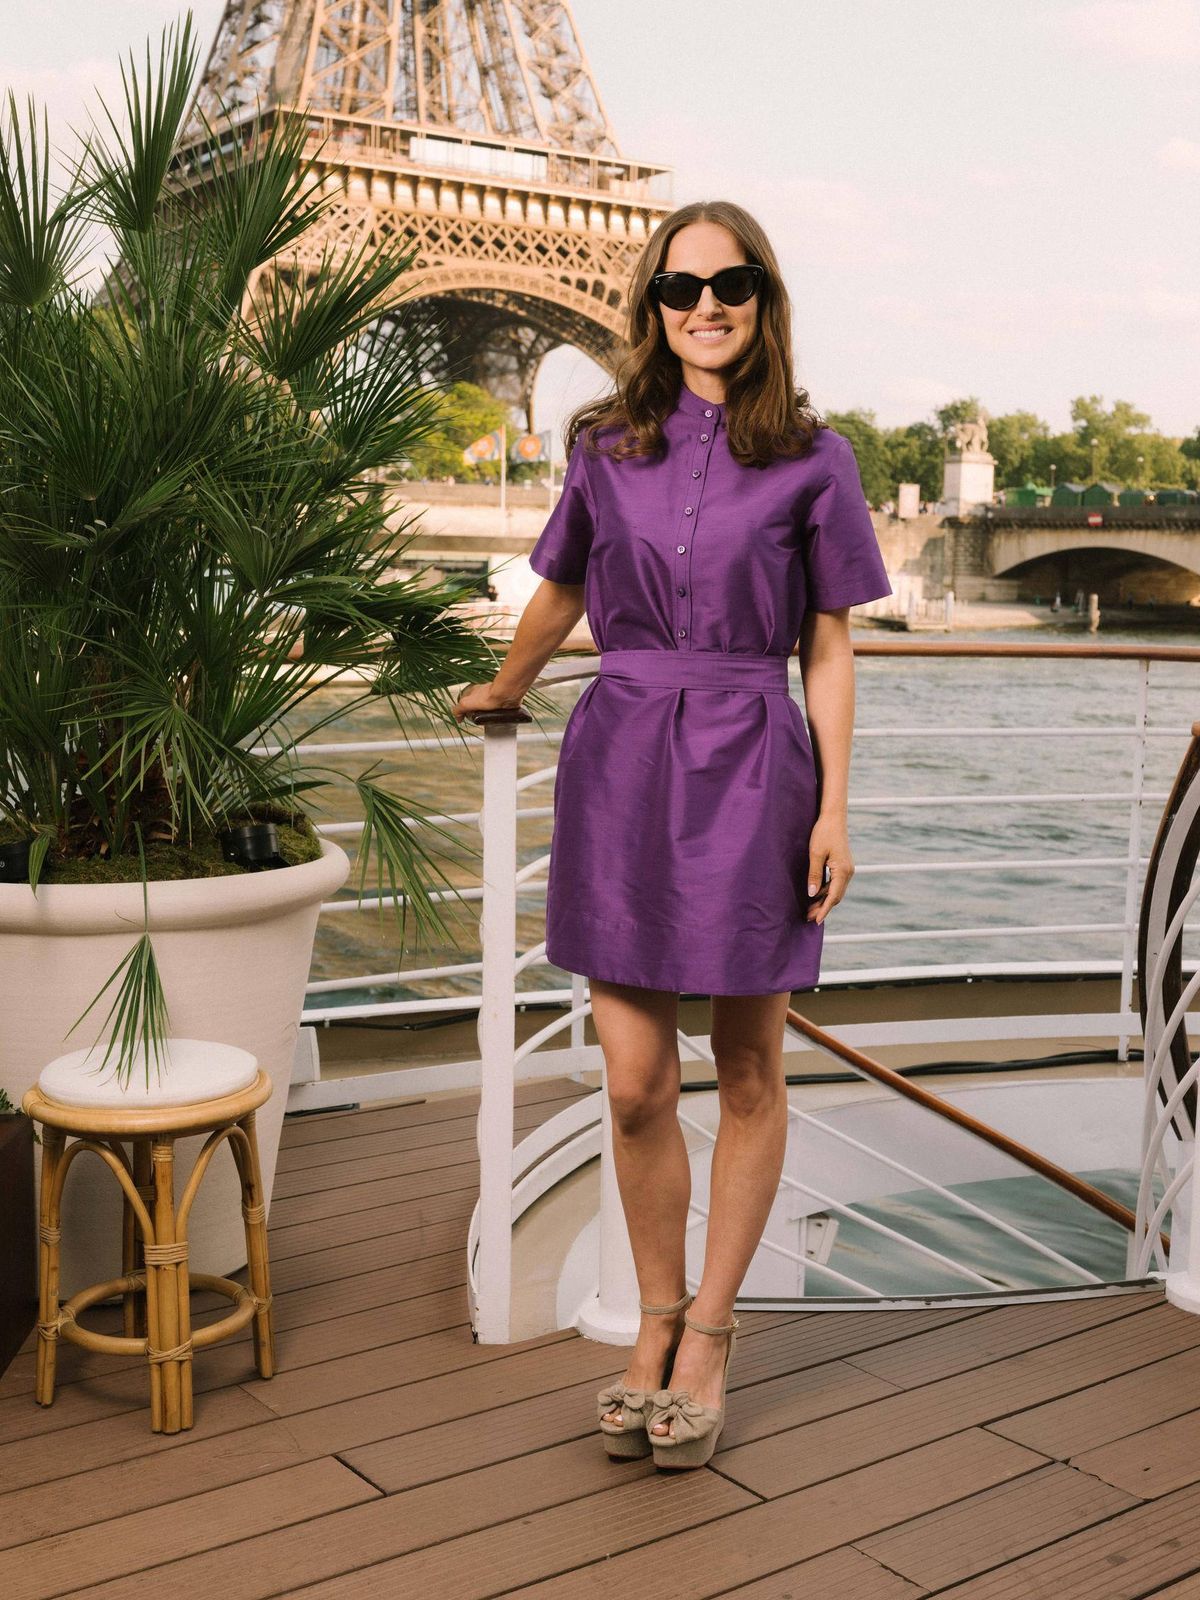 You can go on a Dior Spa Cruise in Paris this summer